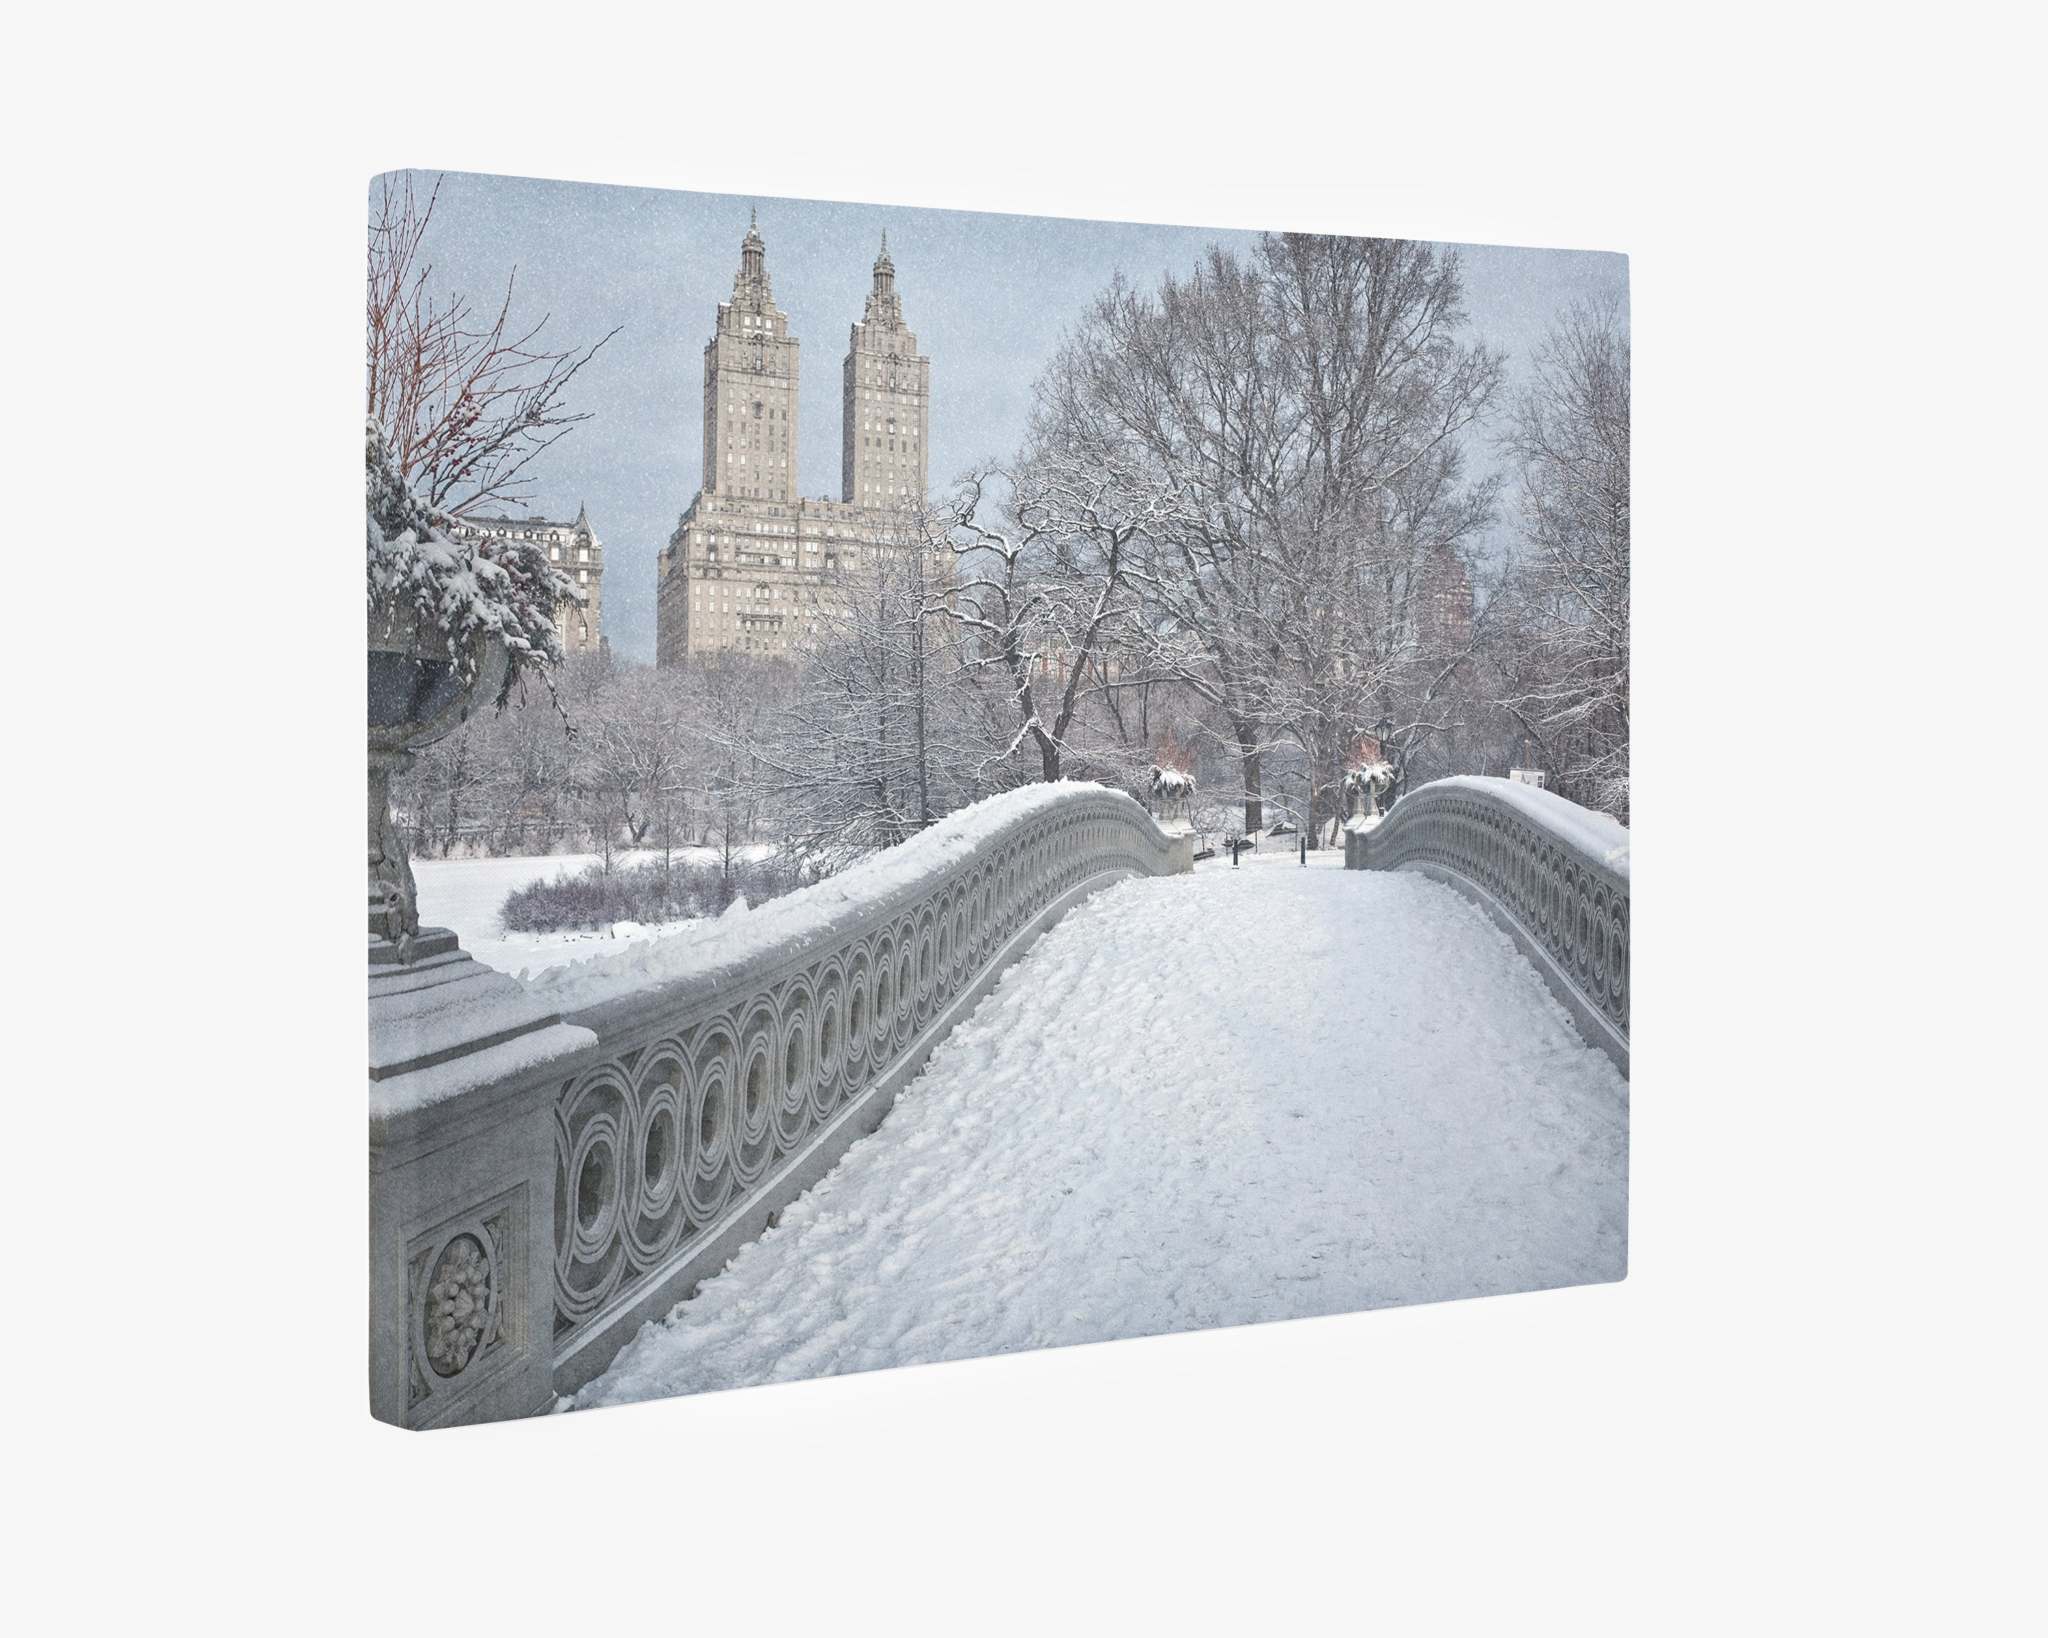 A snow-covered Bow Bridge in Central Park, New York City, leads the viewer's eye towards two prominent, twin-towered buildings in the background. Trees laden with snow frame the scene, adding to the wintery atmosphere. The sky is overcast, enhancing the serene ambiance perfect for a New York City Canvas Wall Art, 'Snow on Bow Bridge' by Offley Green.